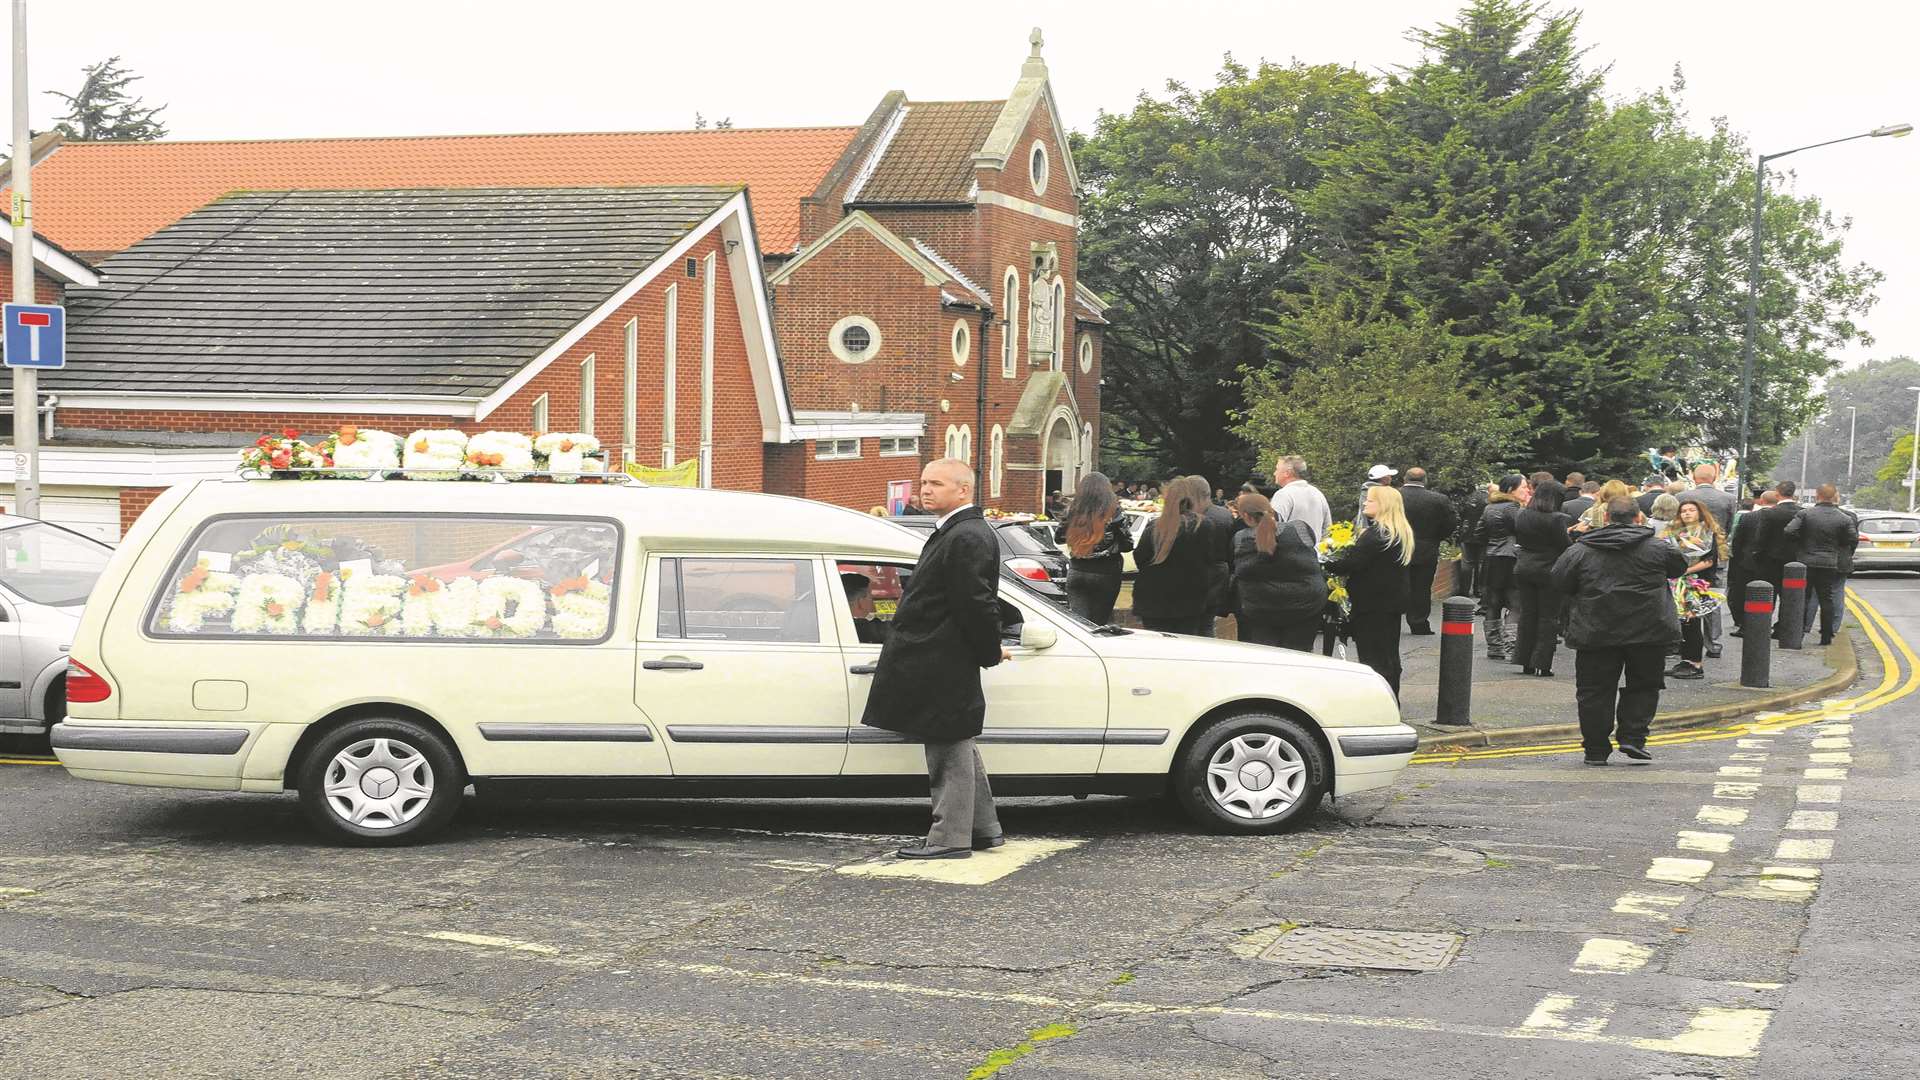 The hearse arrives at the church in Rochester